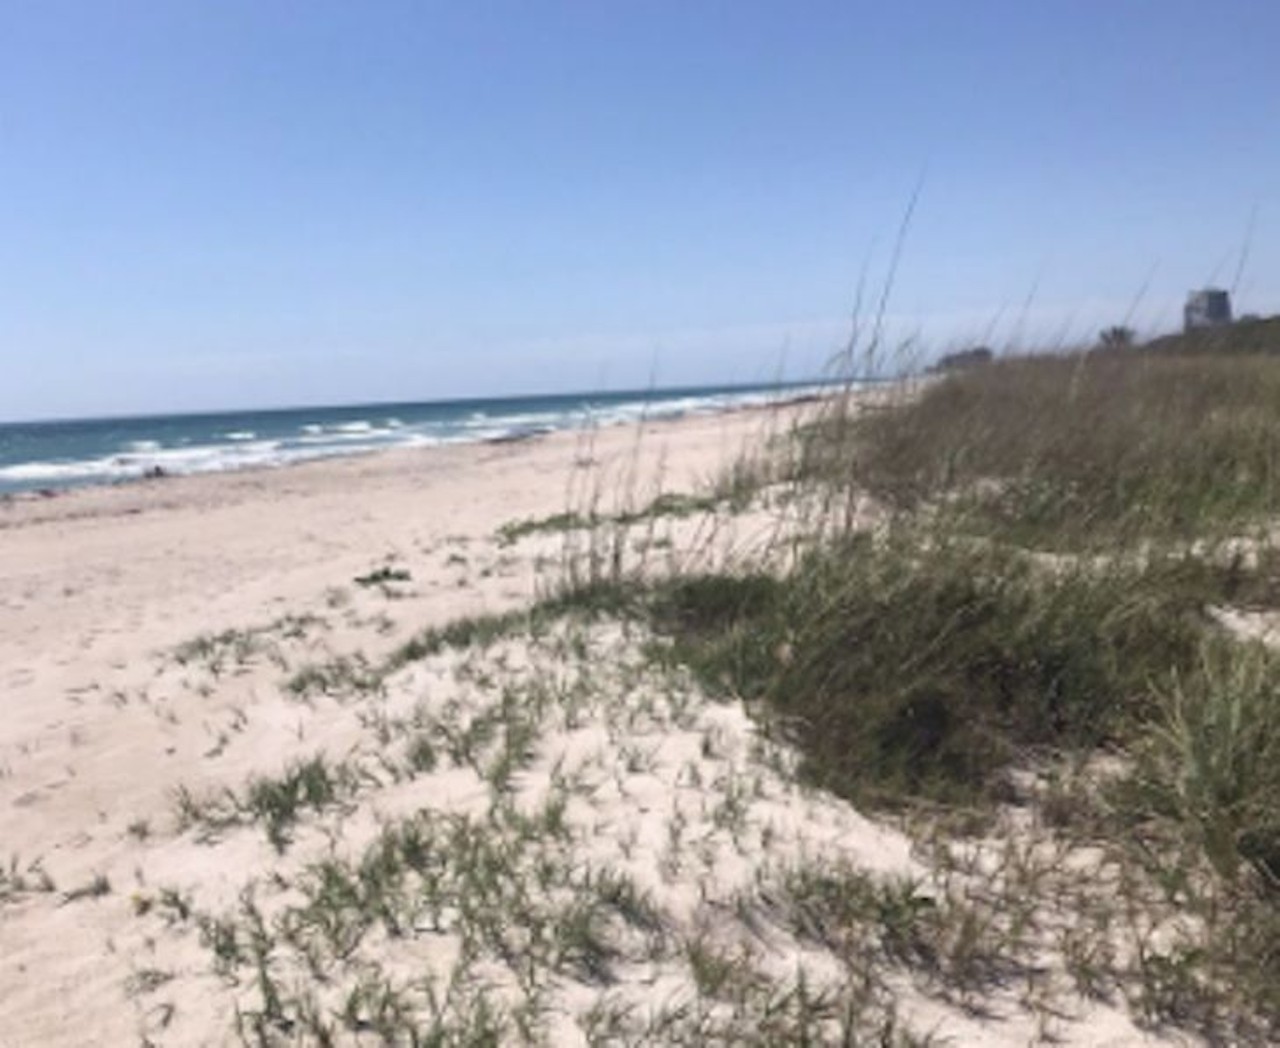 Avalon State Park
Two hours from Orlando
For only $2 in parking fees a day, enjoy these isolated sandy dunes with picnic areas and cool breezes. Light waves also make this location great for wakeboarding or surfing.
Photo via Missy H./Yelp